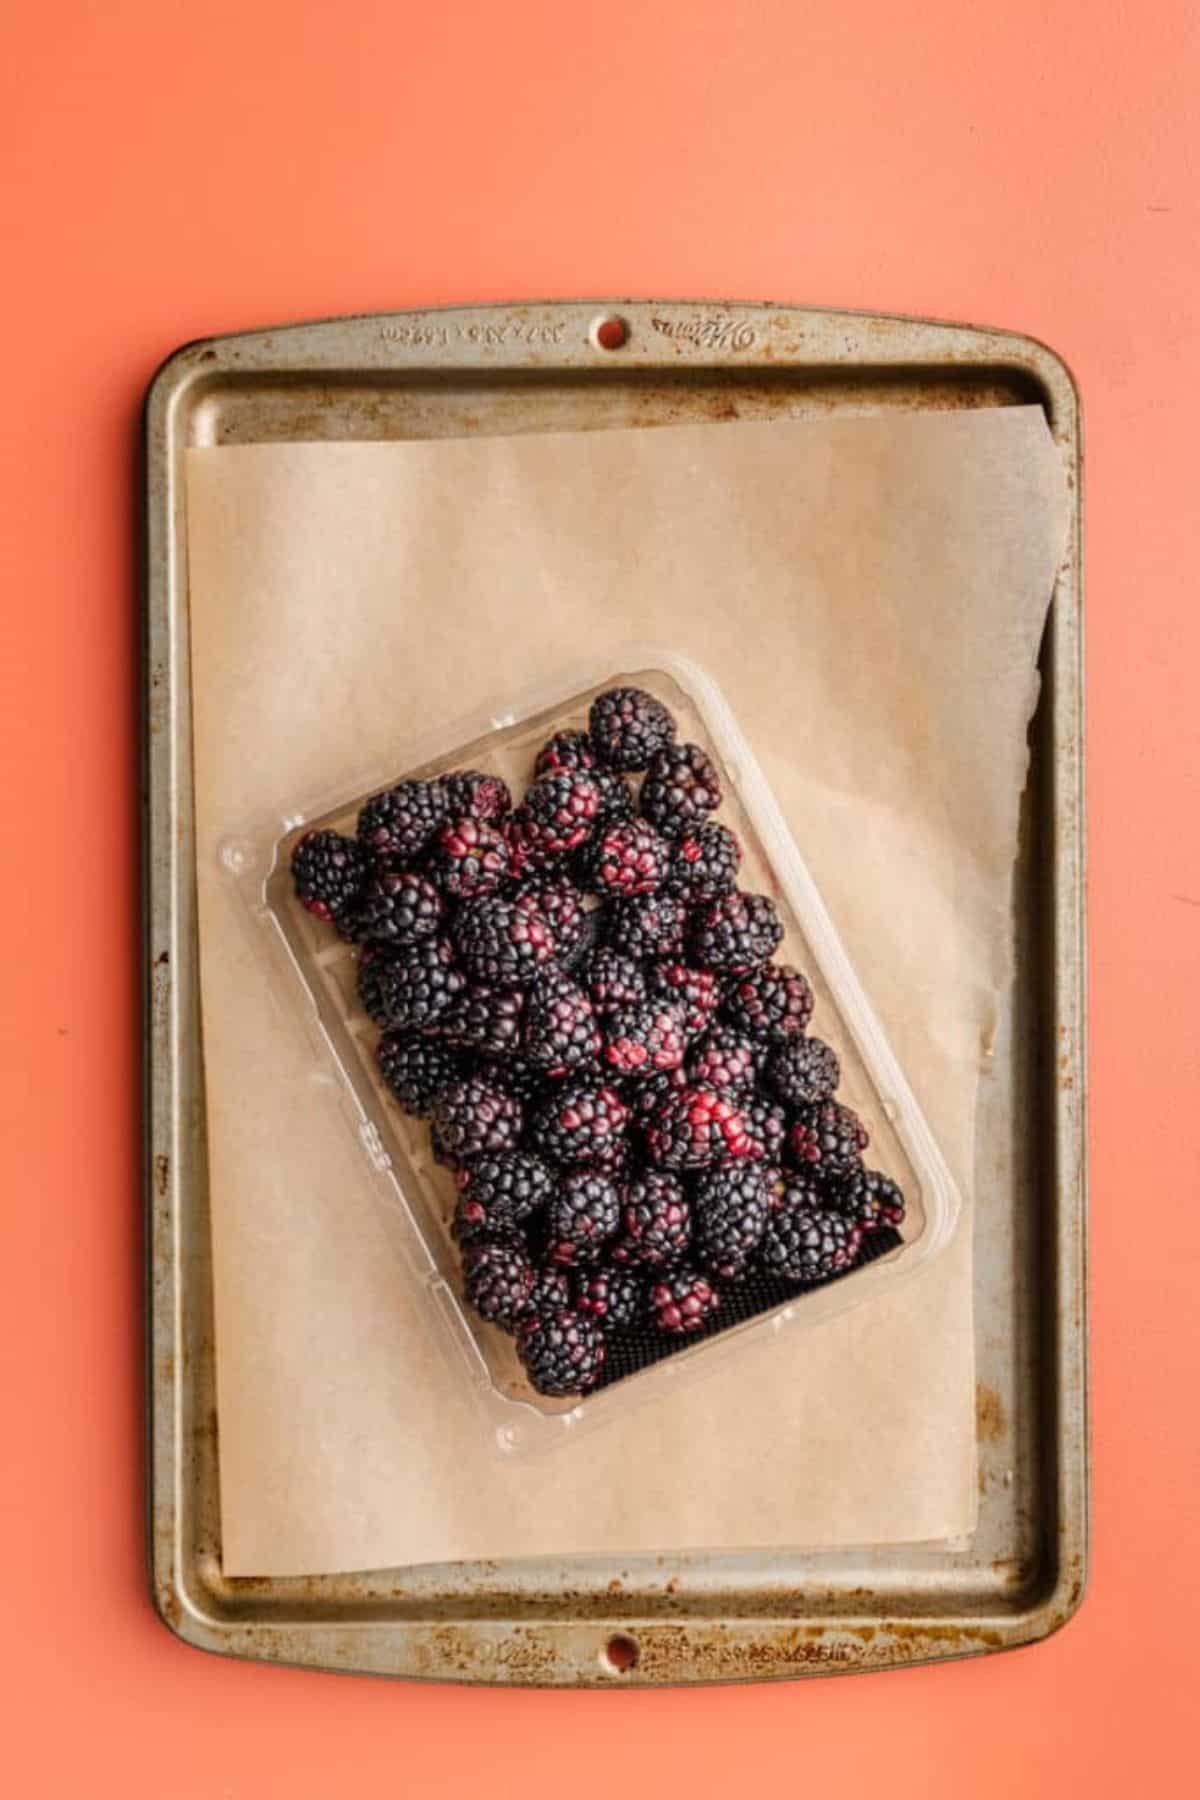 Baking sheet, parchment sheet, and berries.